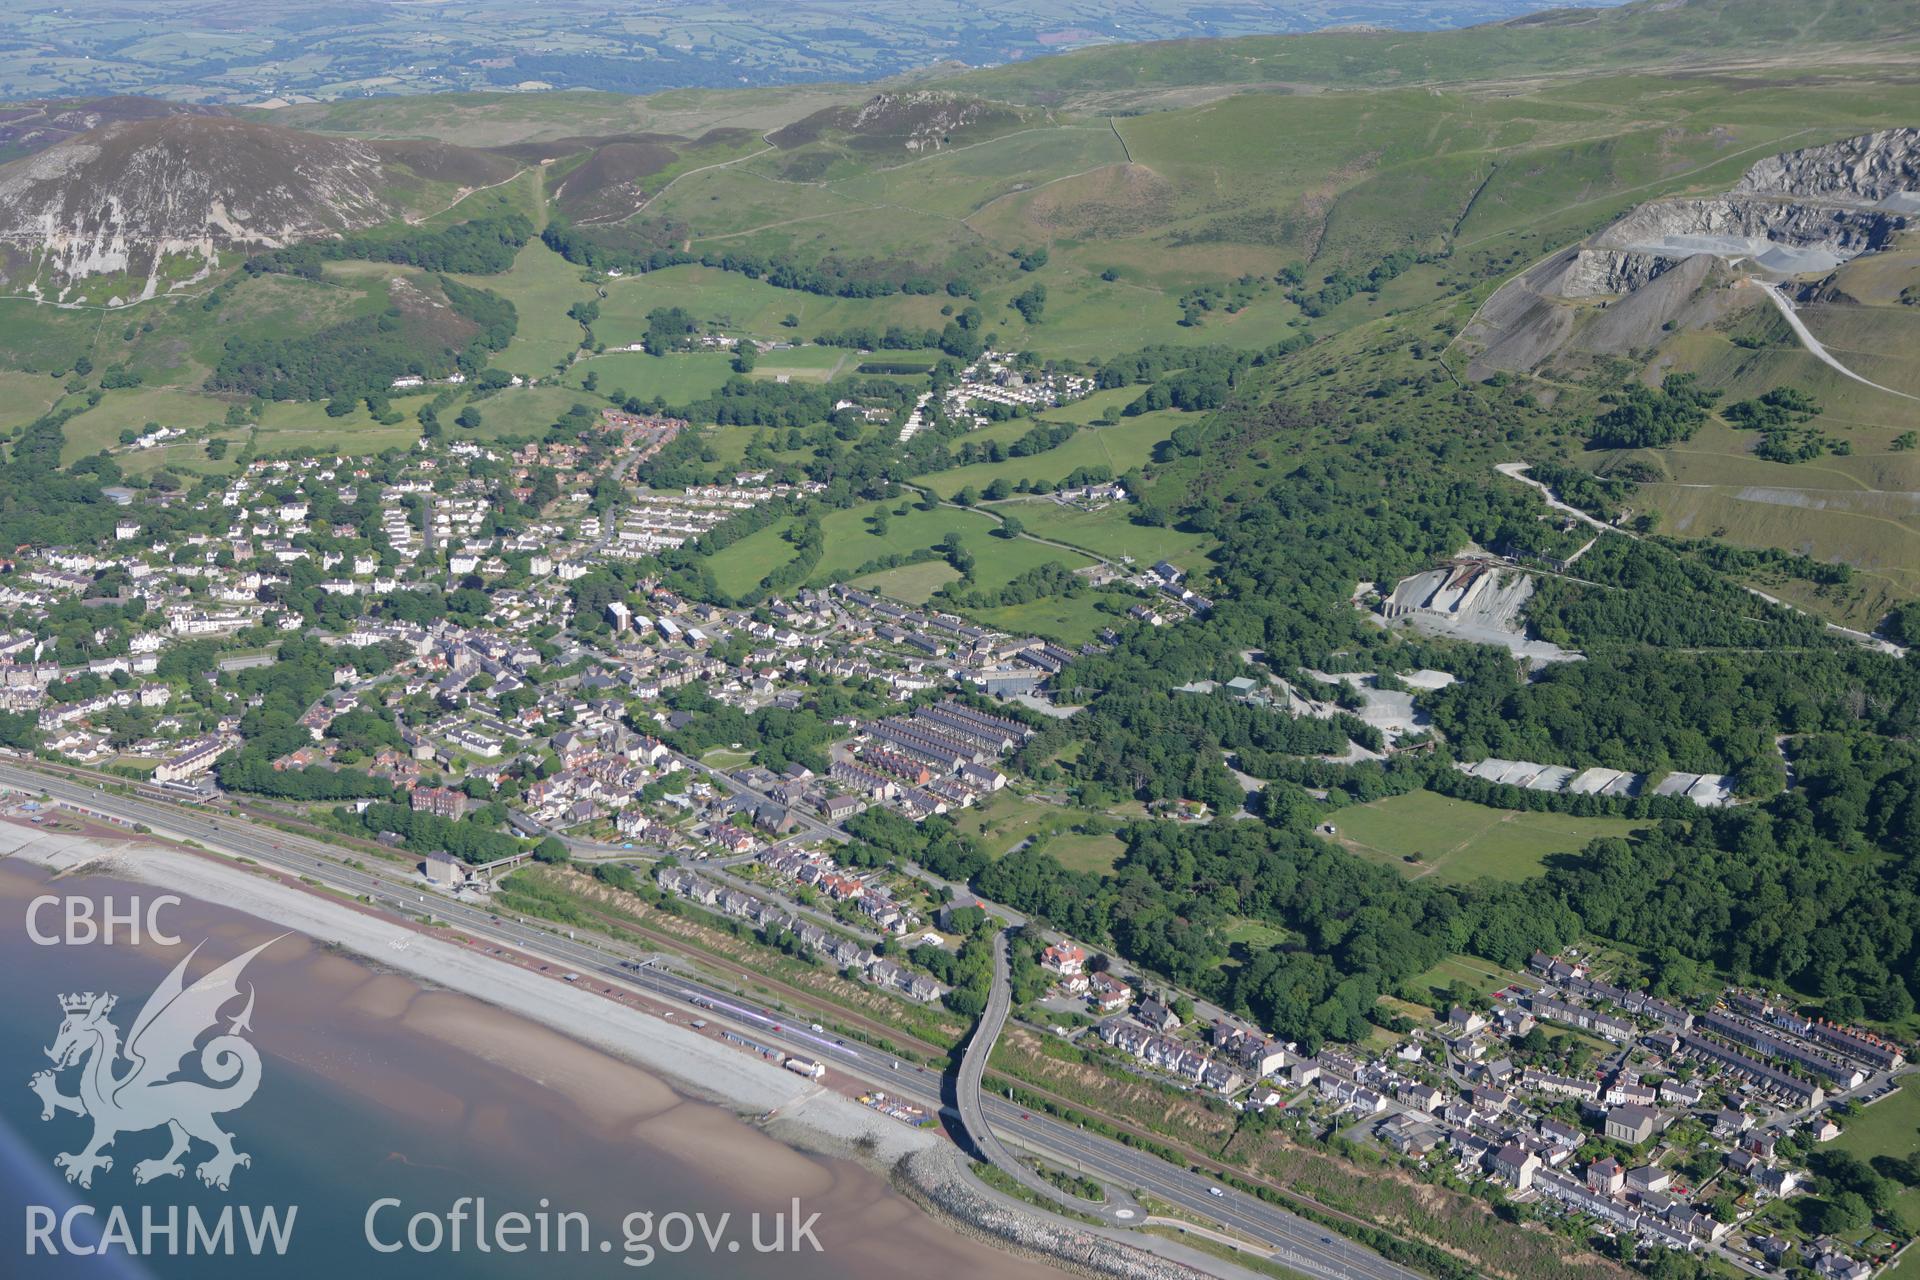 RCAHMW colour oblique photograph of Penmaenmawr town. Taken by Toby Driver on 16/06/2010.